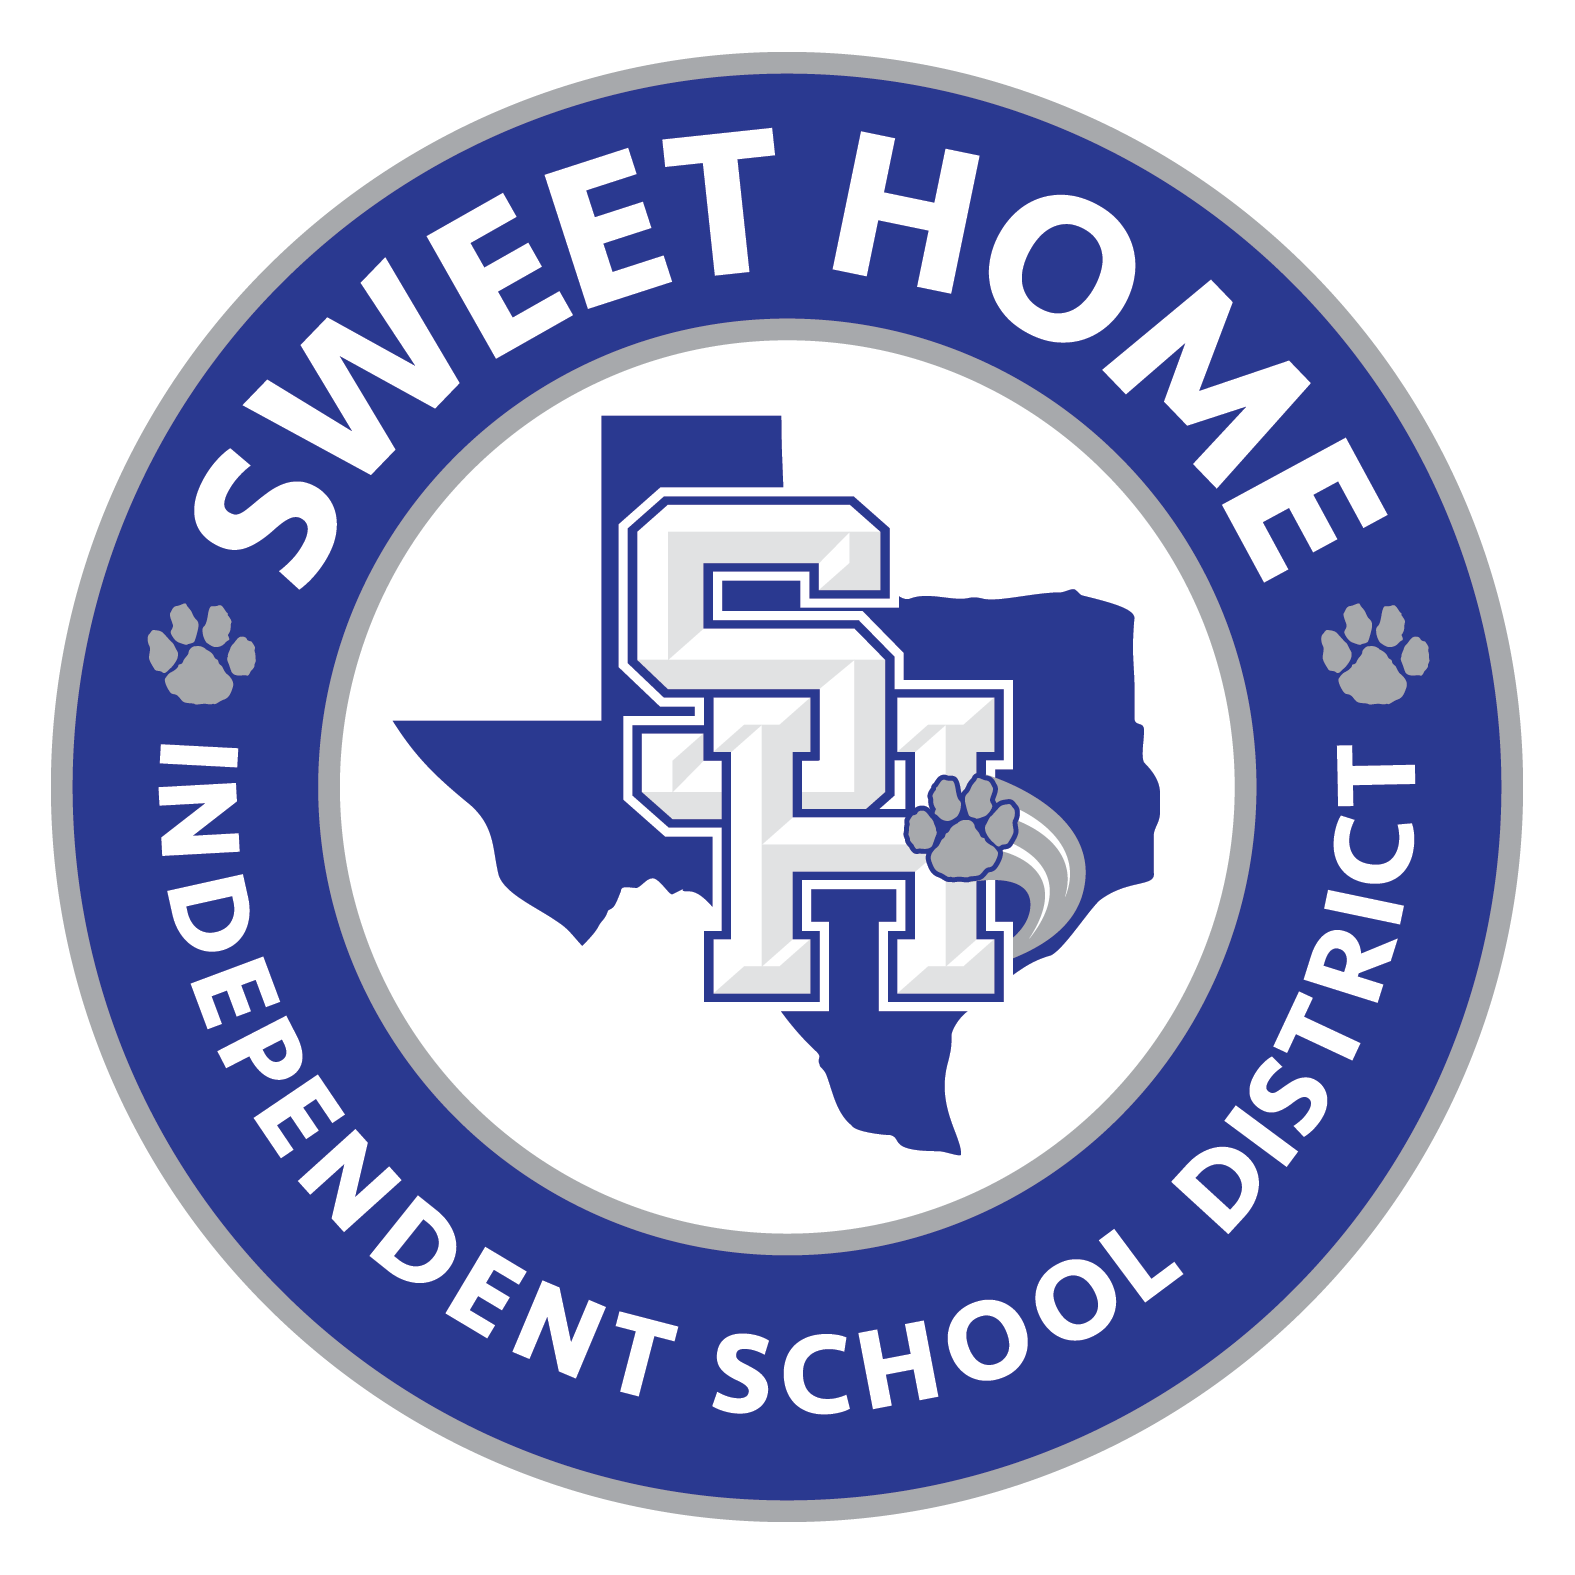 District Logo - Sweet Home Independent School District / Homepage